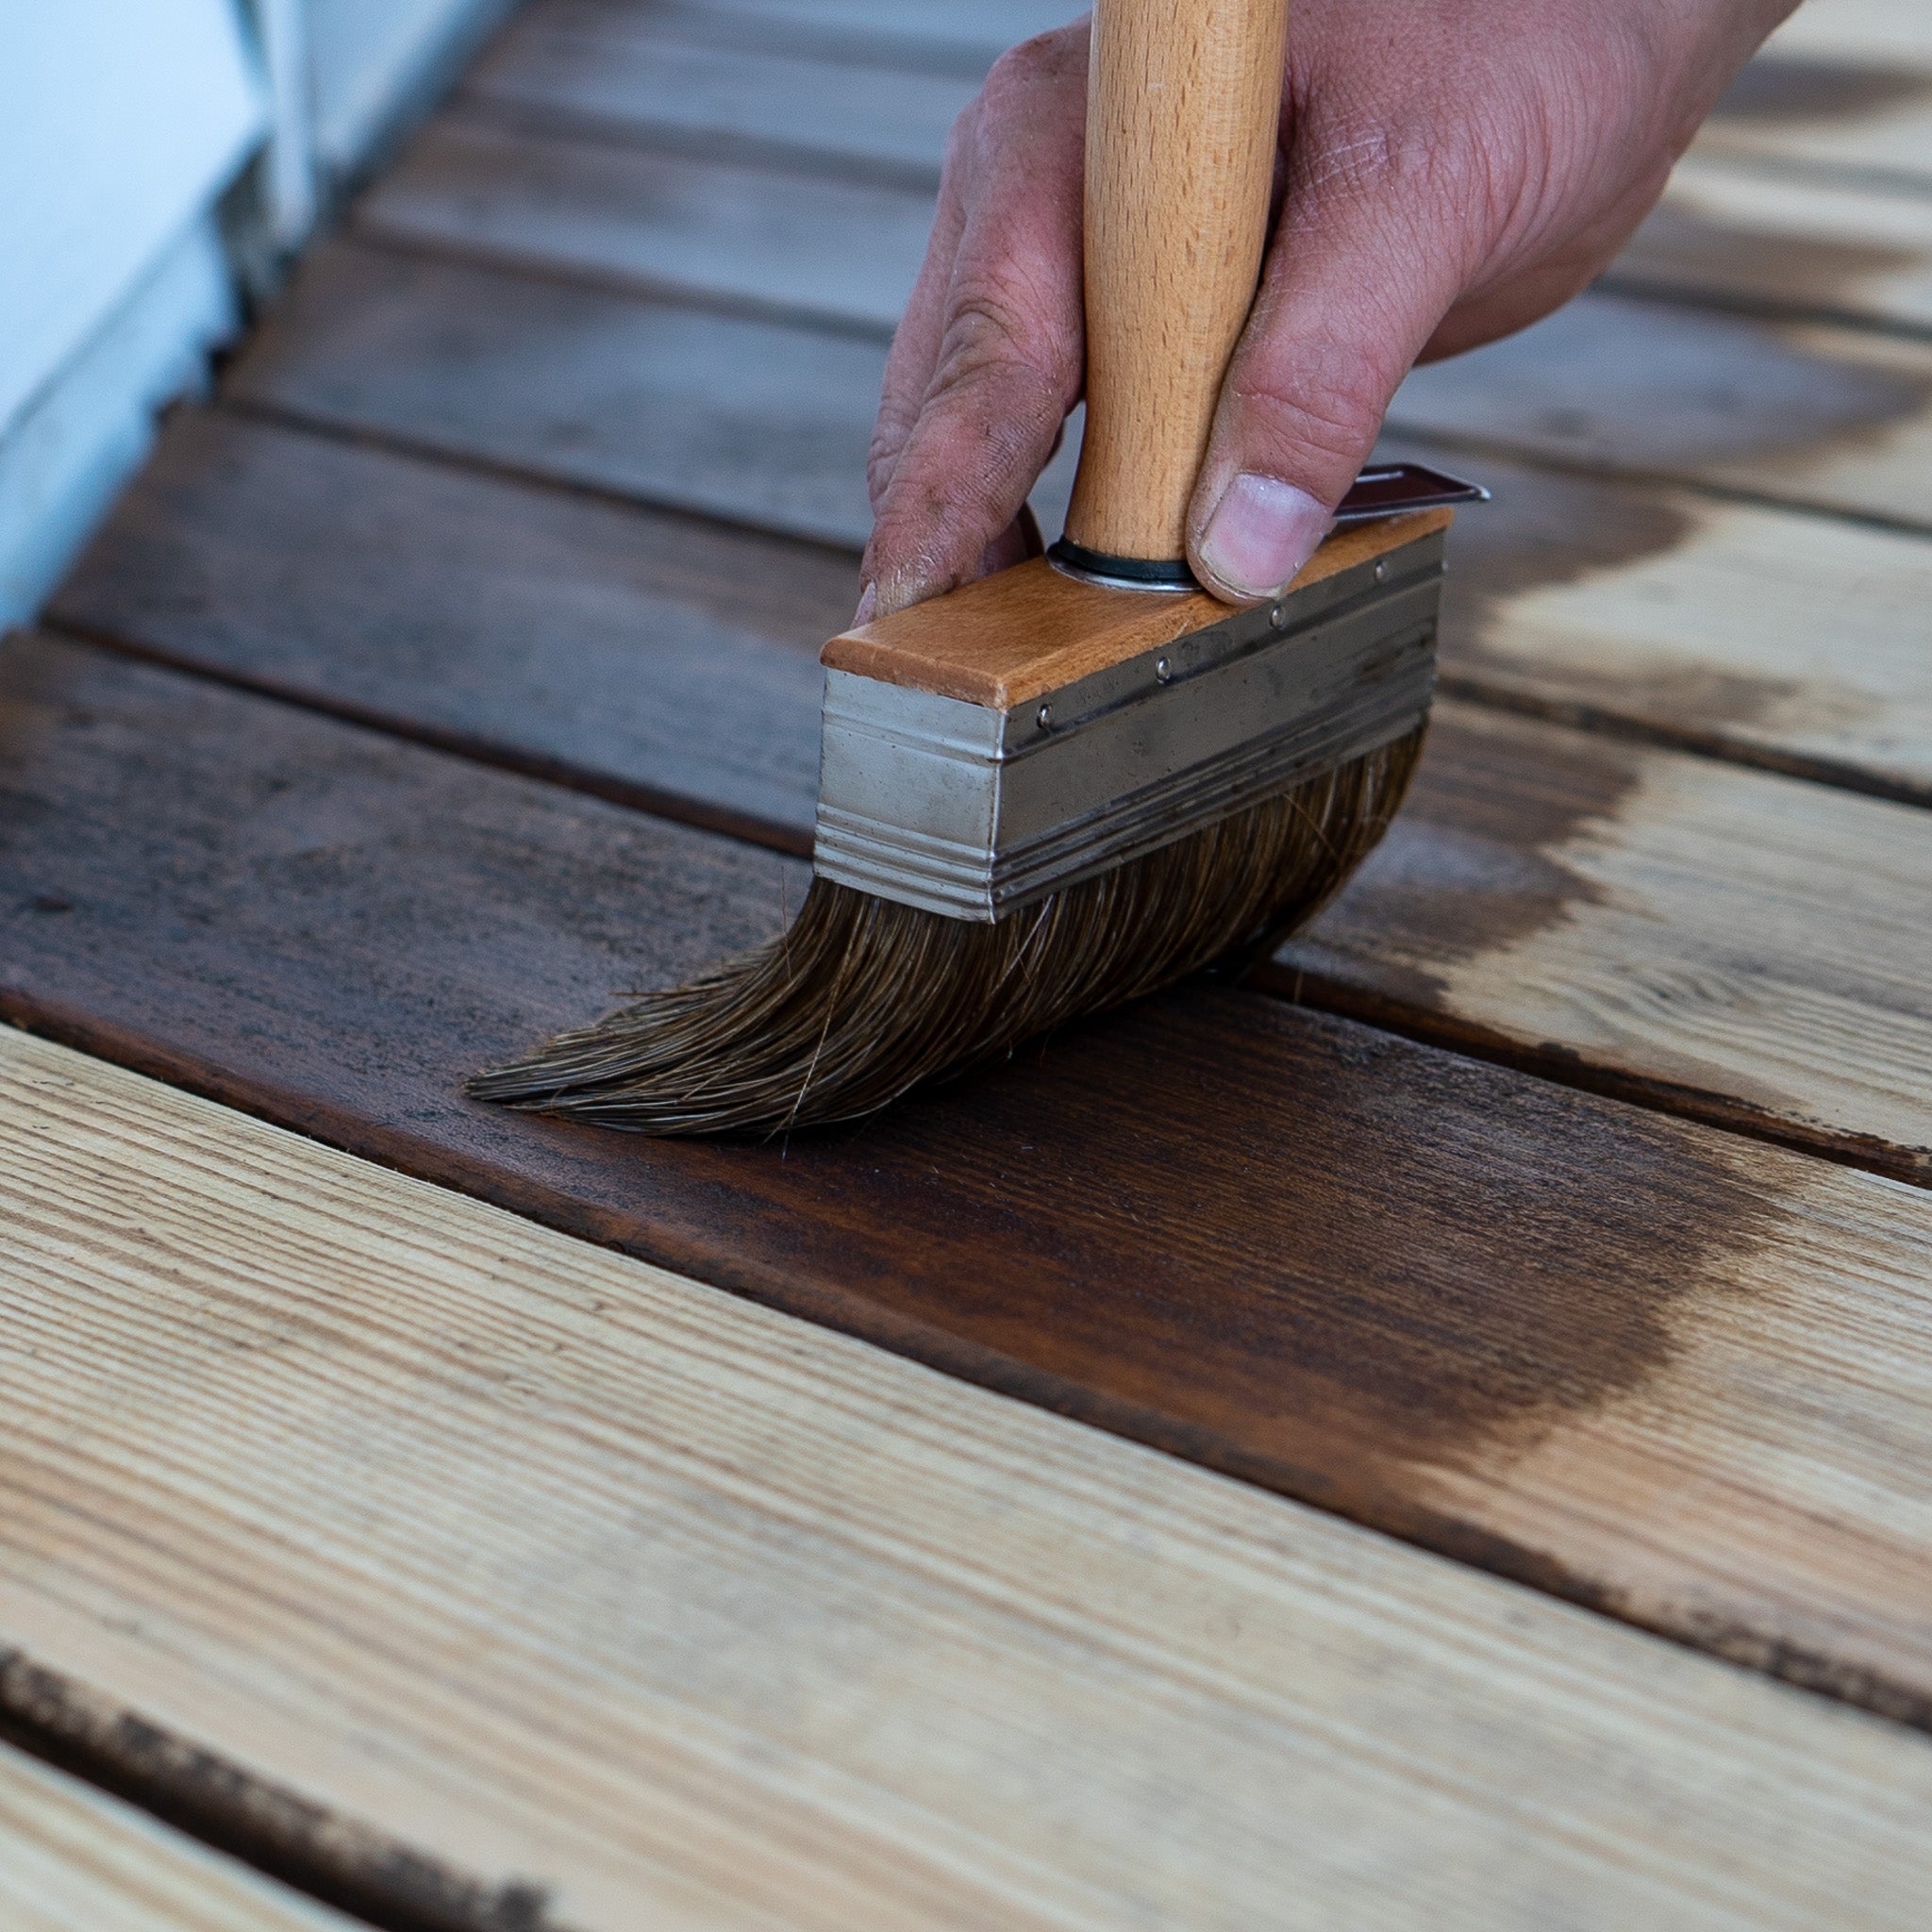 Restore-A-Deck Staining Brush